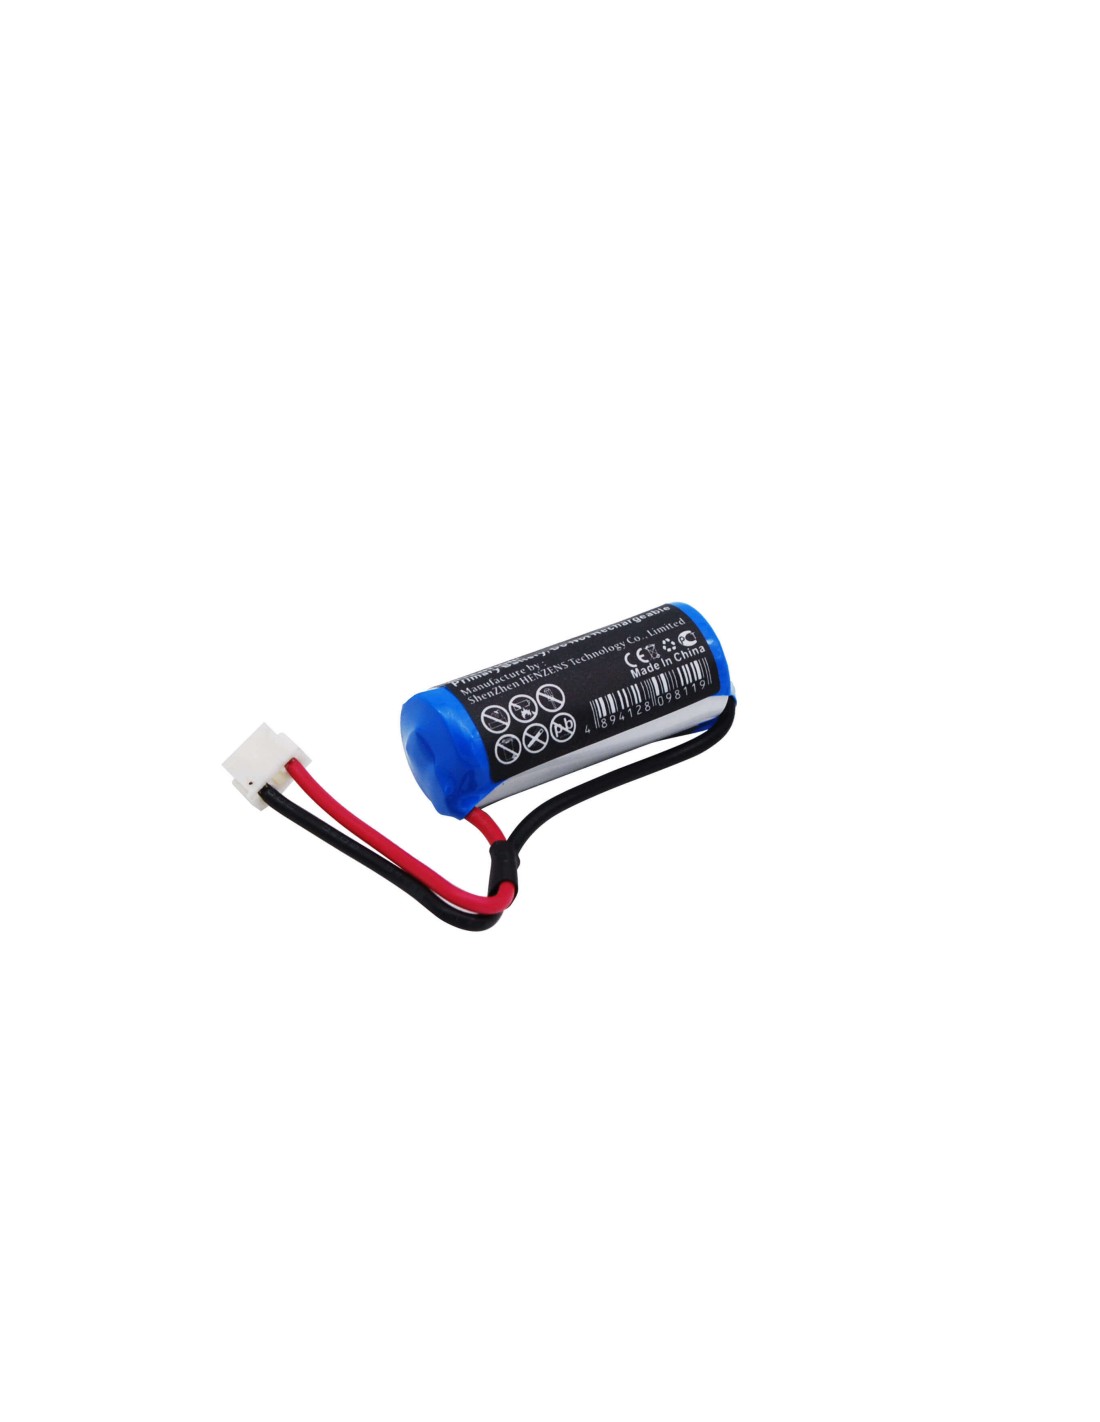 Battery for Mitsubishi Fx2nc Series Controllers 3.6V, 450mAh - 1.62Wh